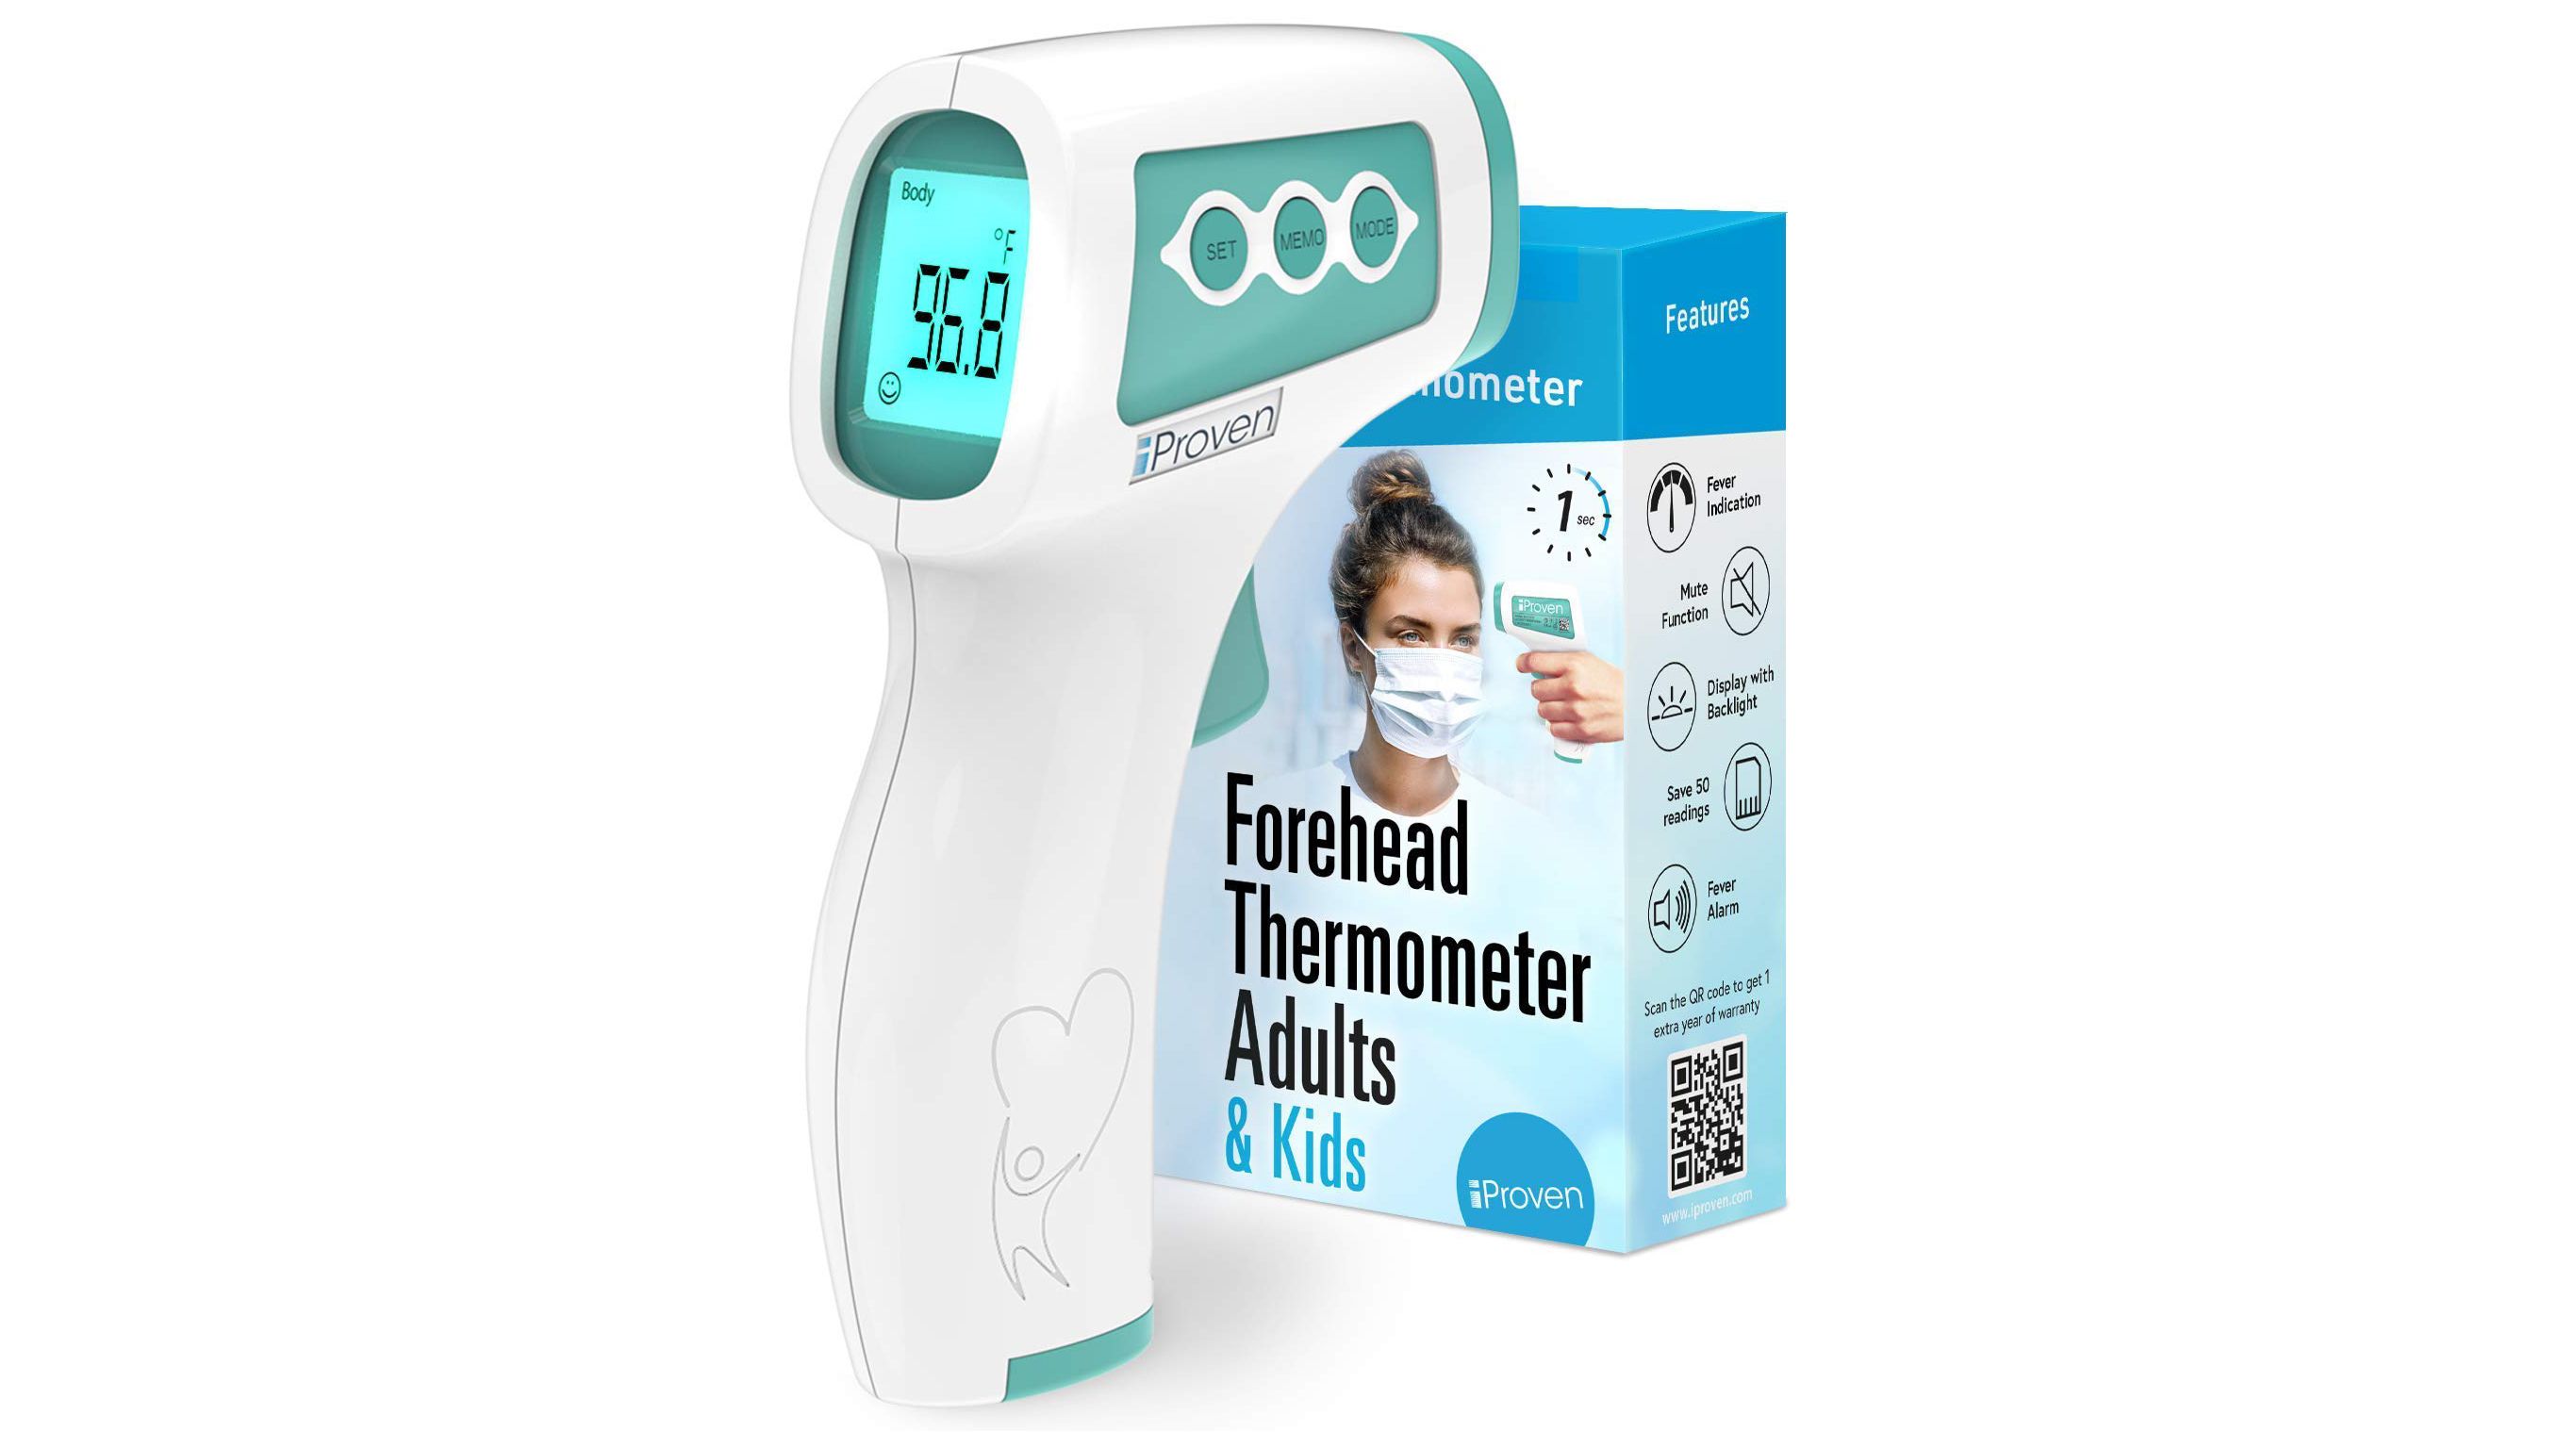 https://media.cnn.com/api/v1/images/stellar/prod/210317115233-best-thermometers-iproven-no-touch-thermometer.jpg?q=w_2732,h_1536,x_0,y_0,c_fill